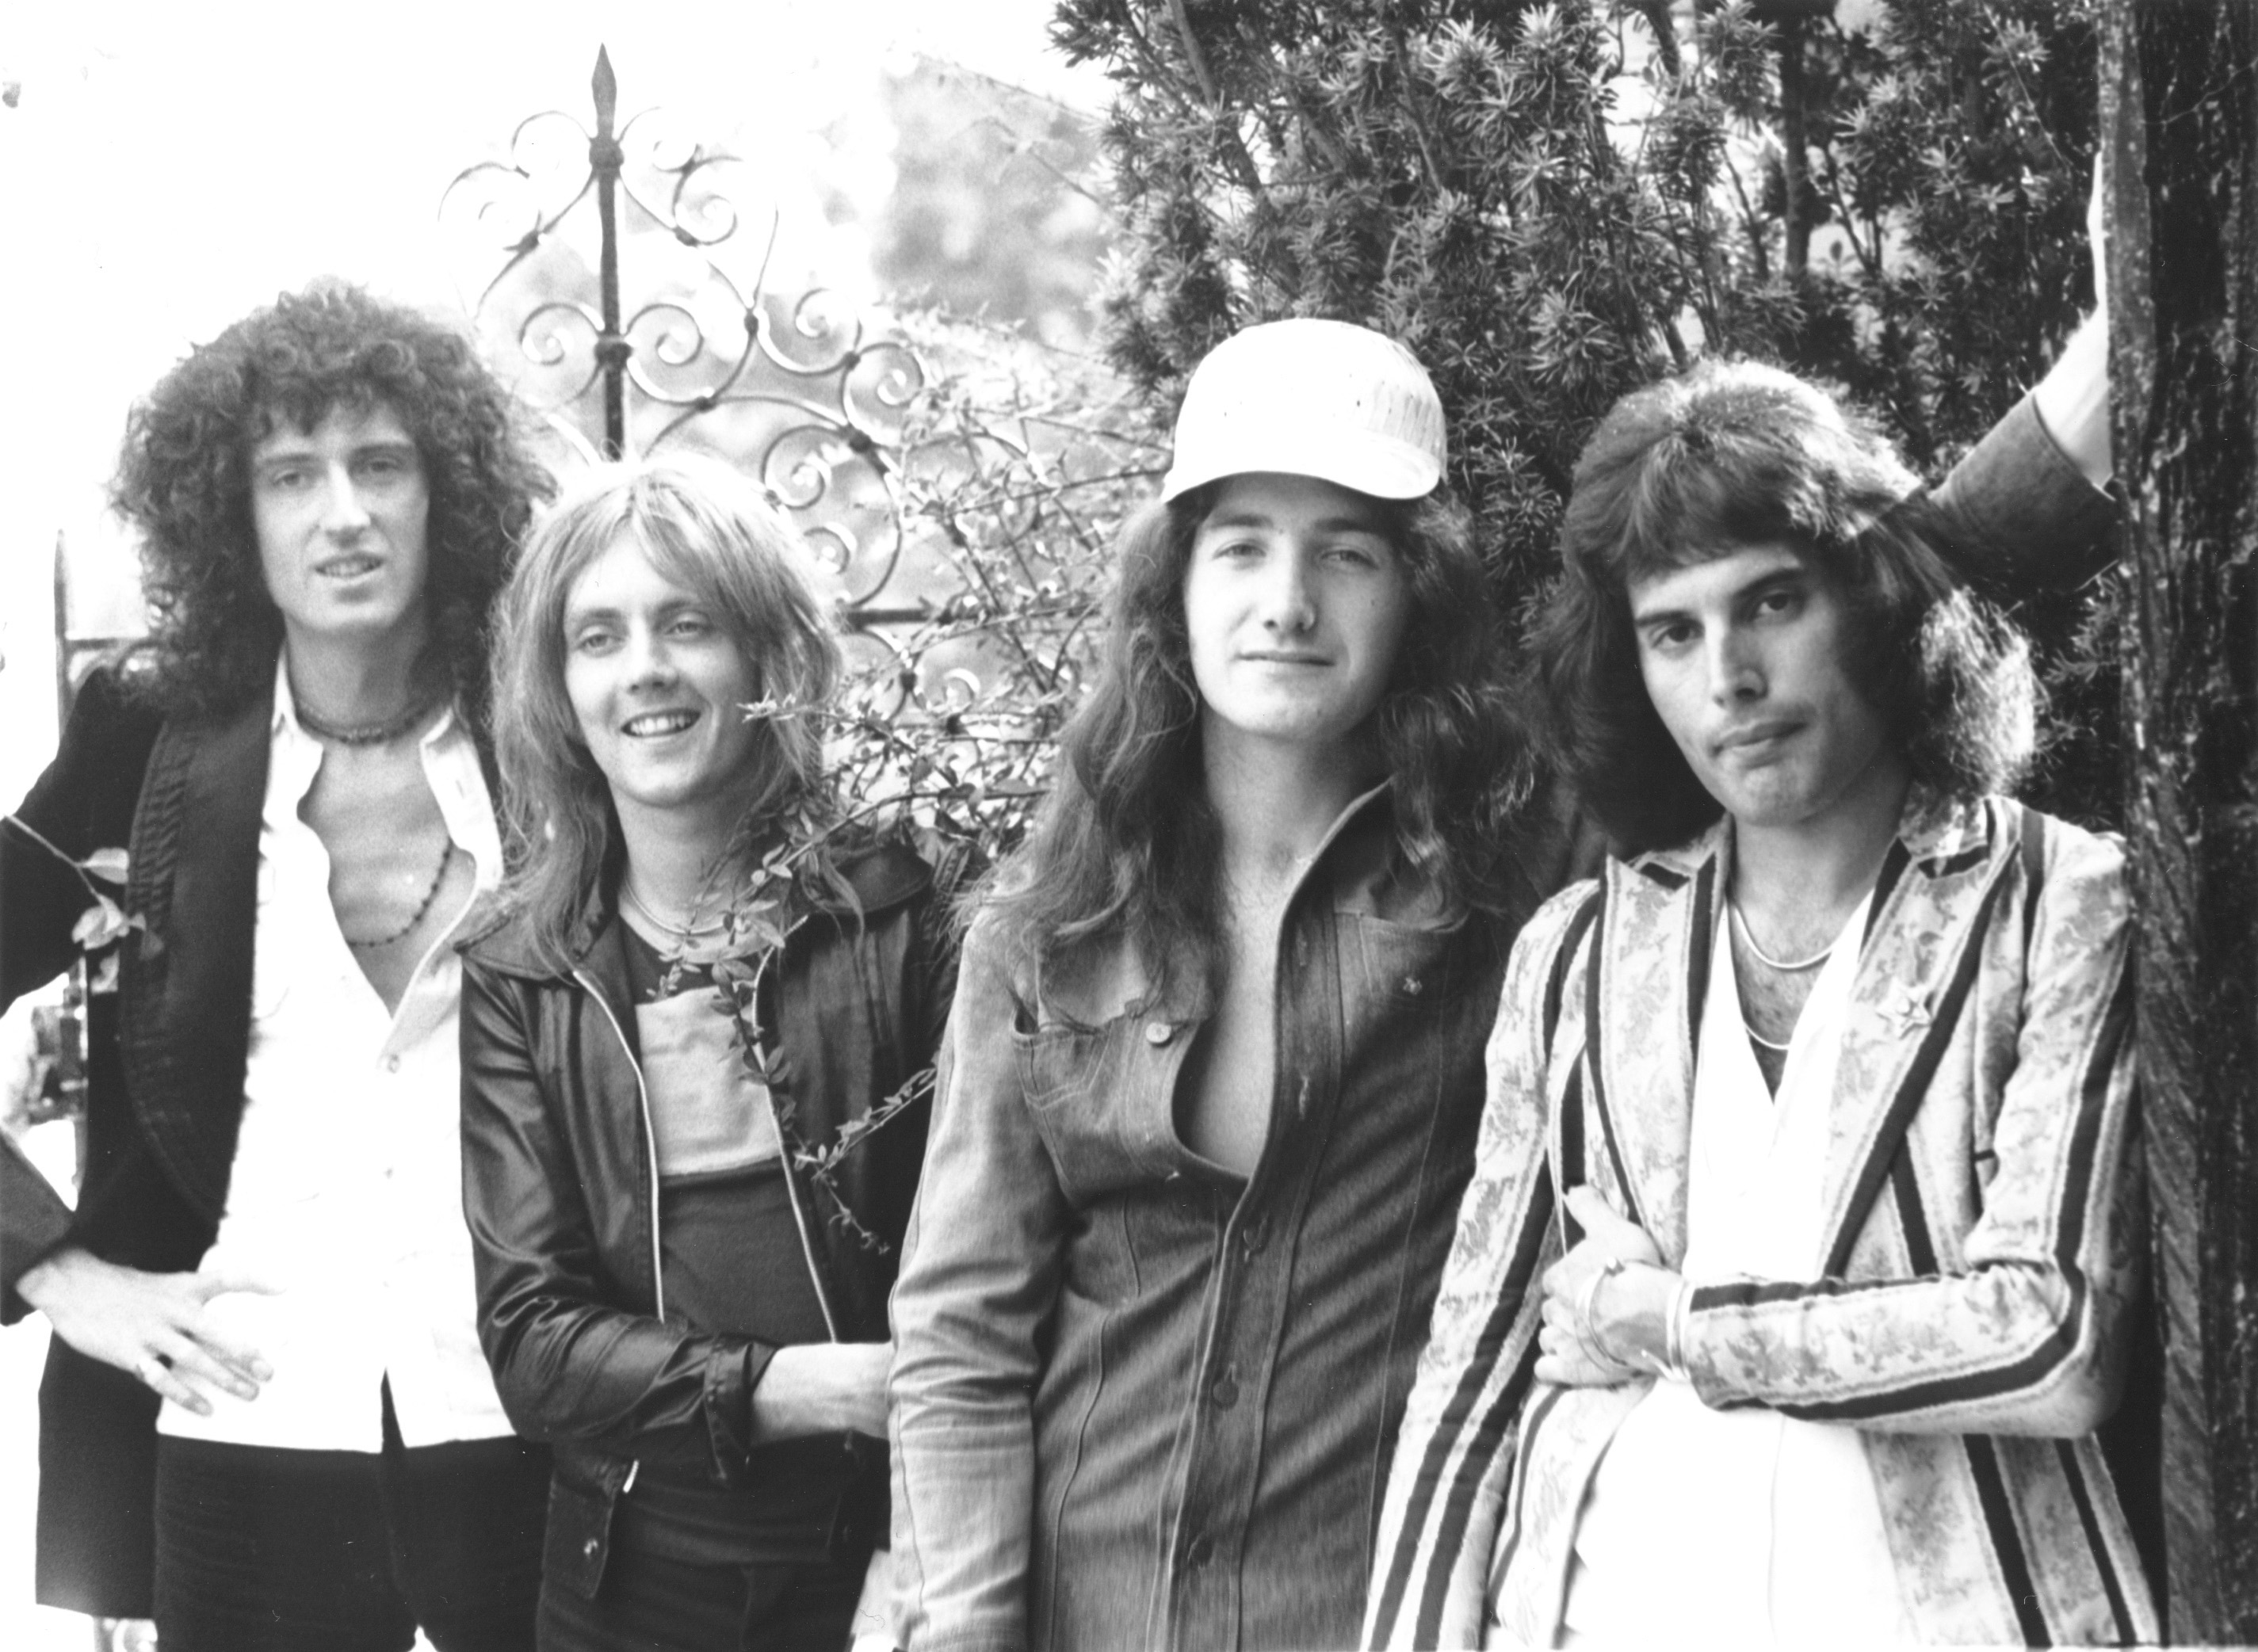 Brian May, Roger Taylor, John Deacon, and Freddie Mercury of the Queen band in 1970. | Source: Getty Images